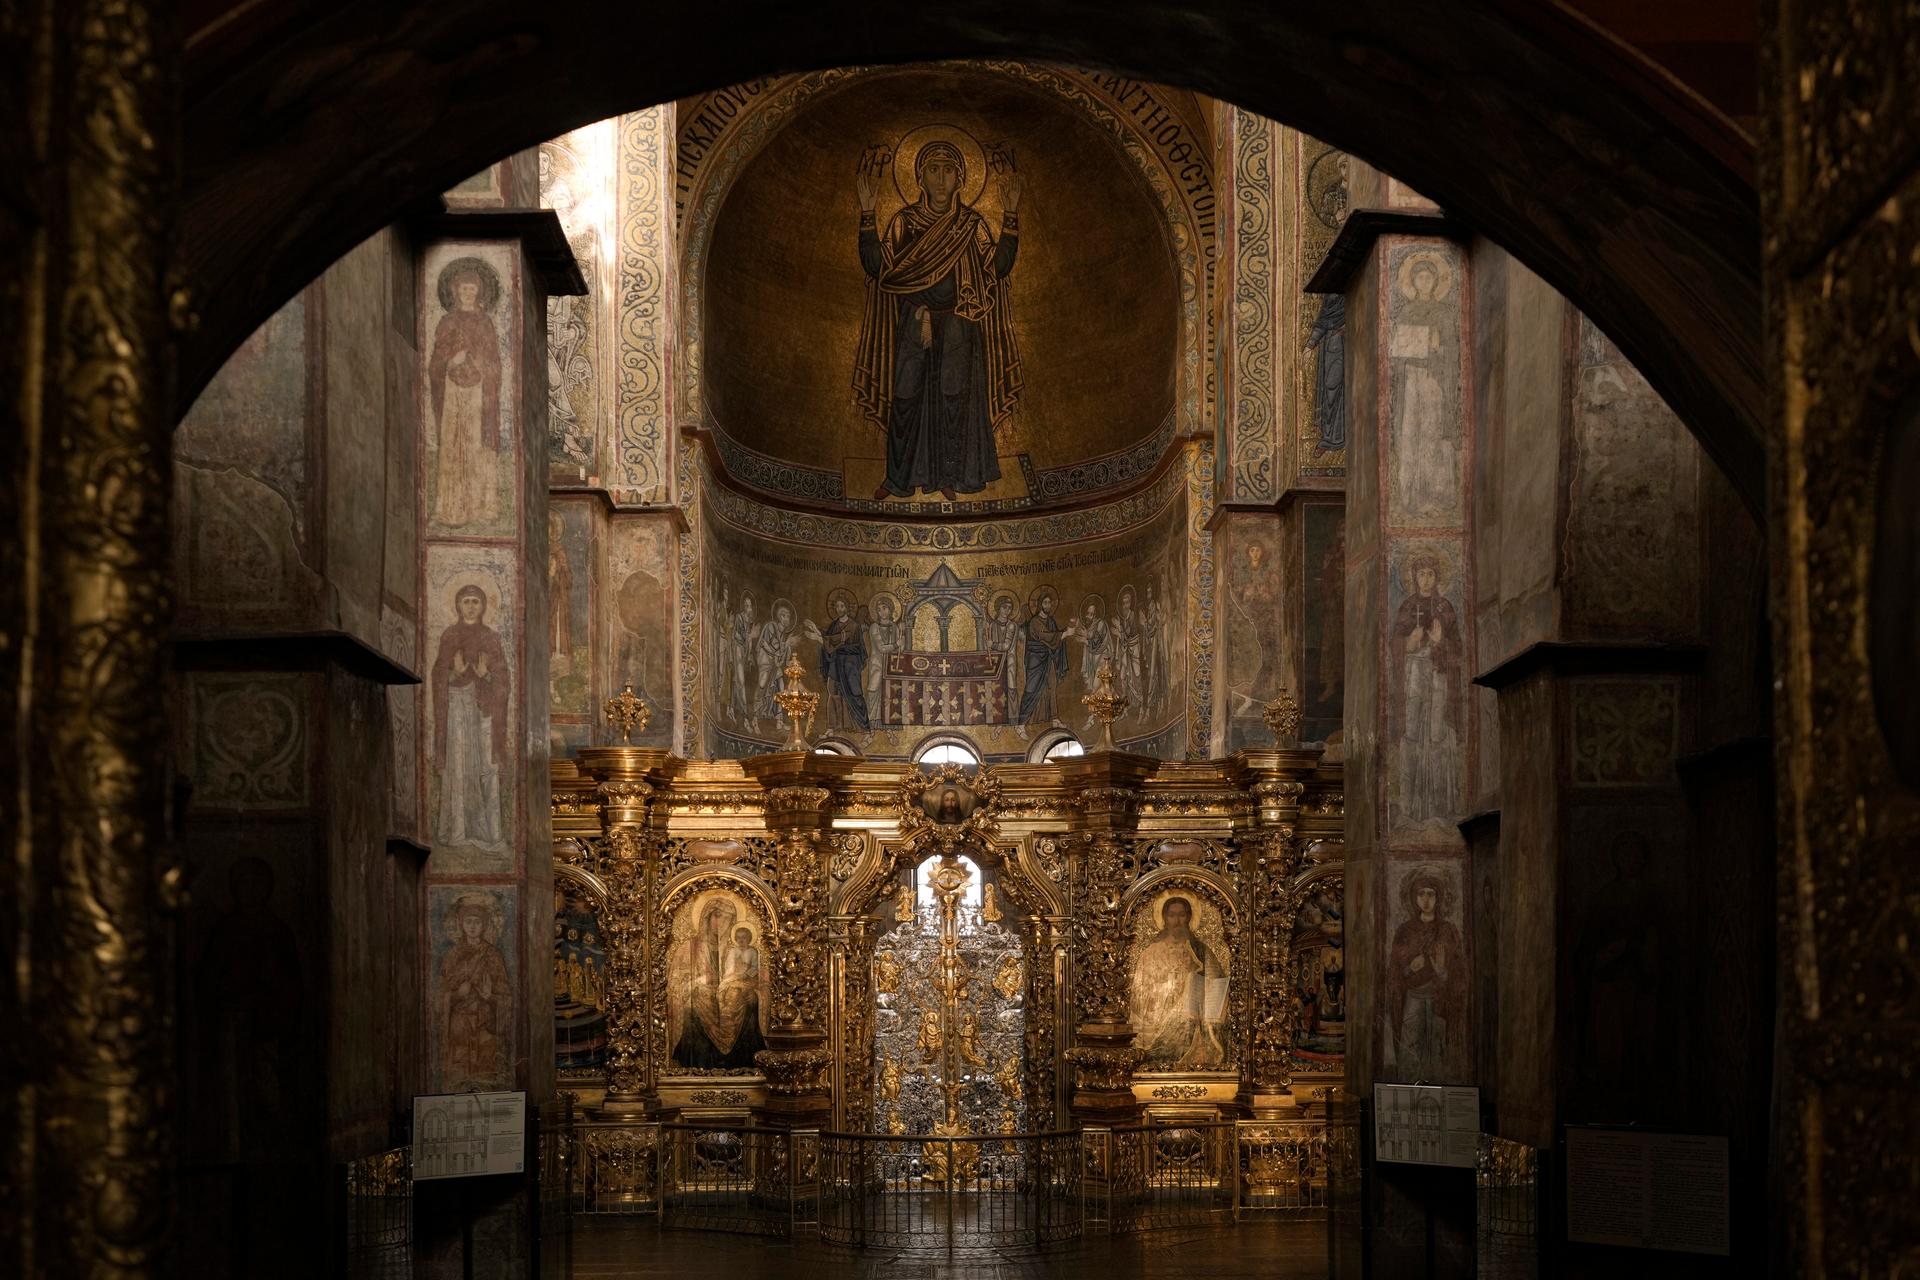 A view of the interior of Saint Sophia Cathedral.